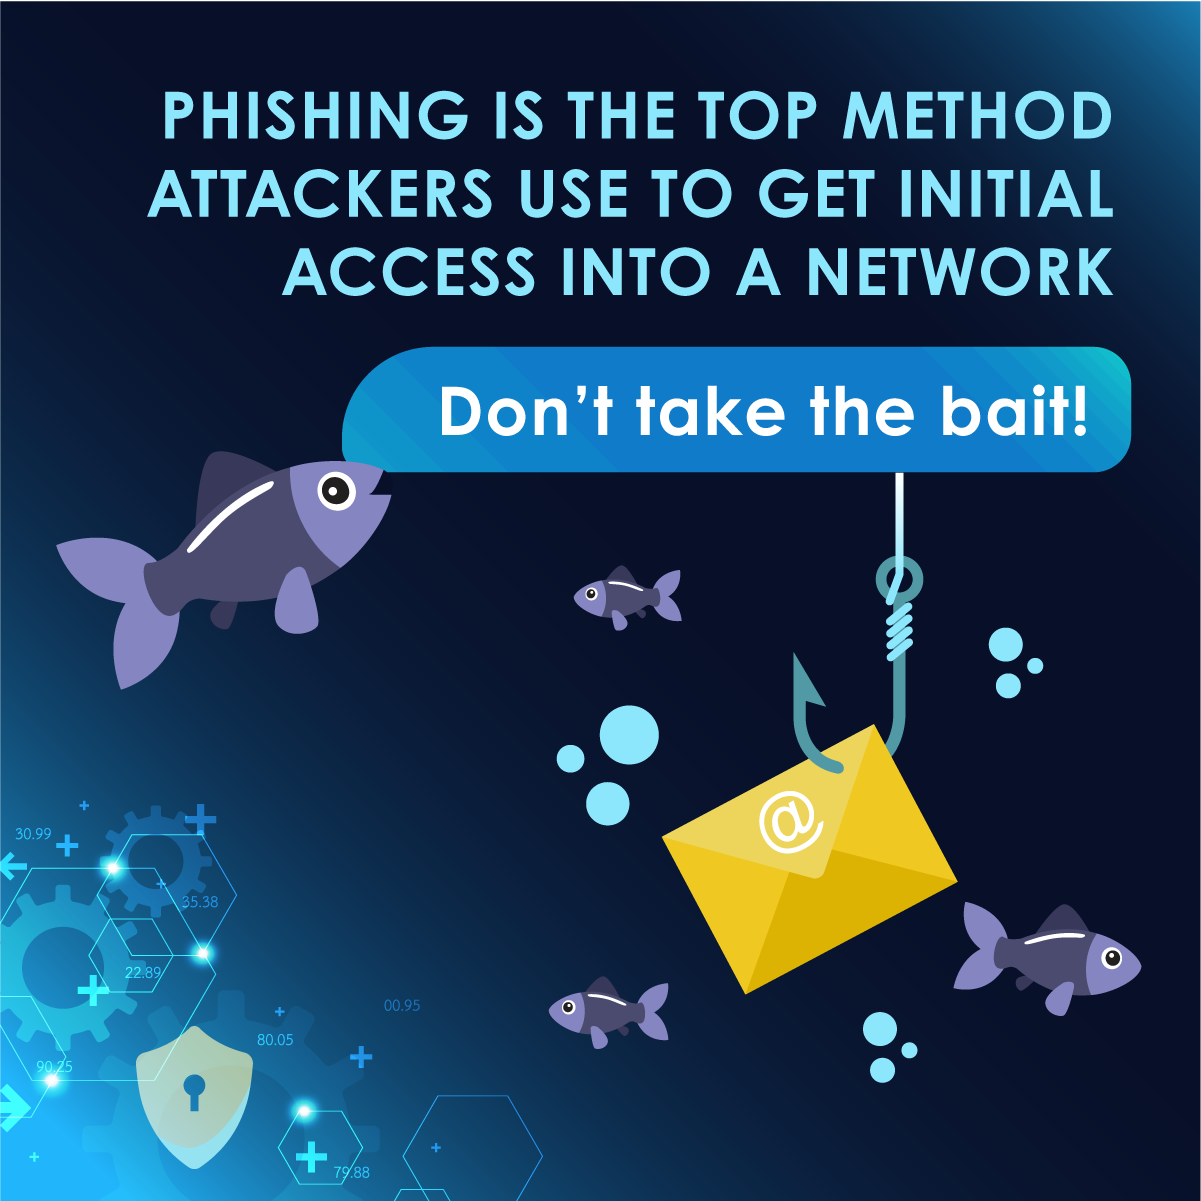 Phishing emails are the top method attackers use to get initial access into a network.